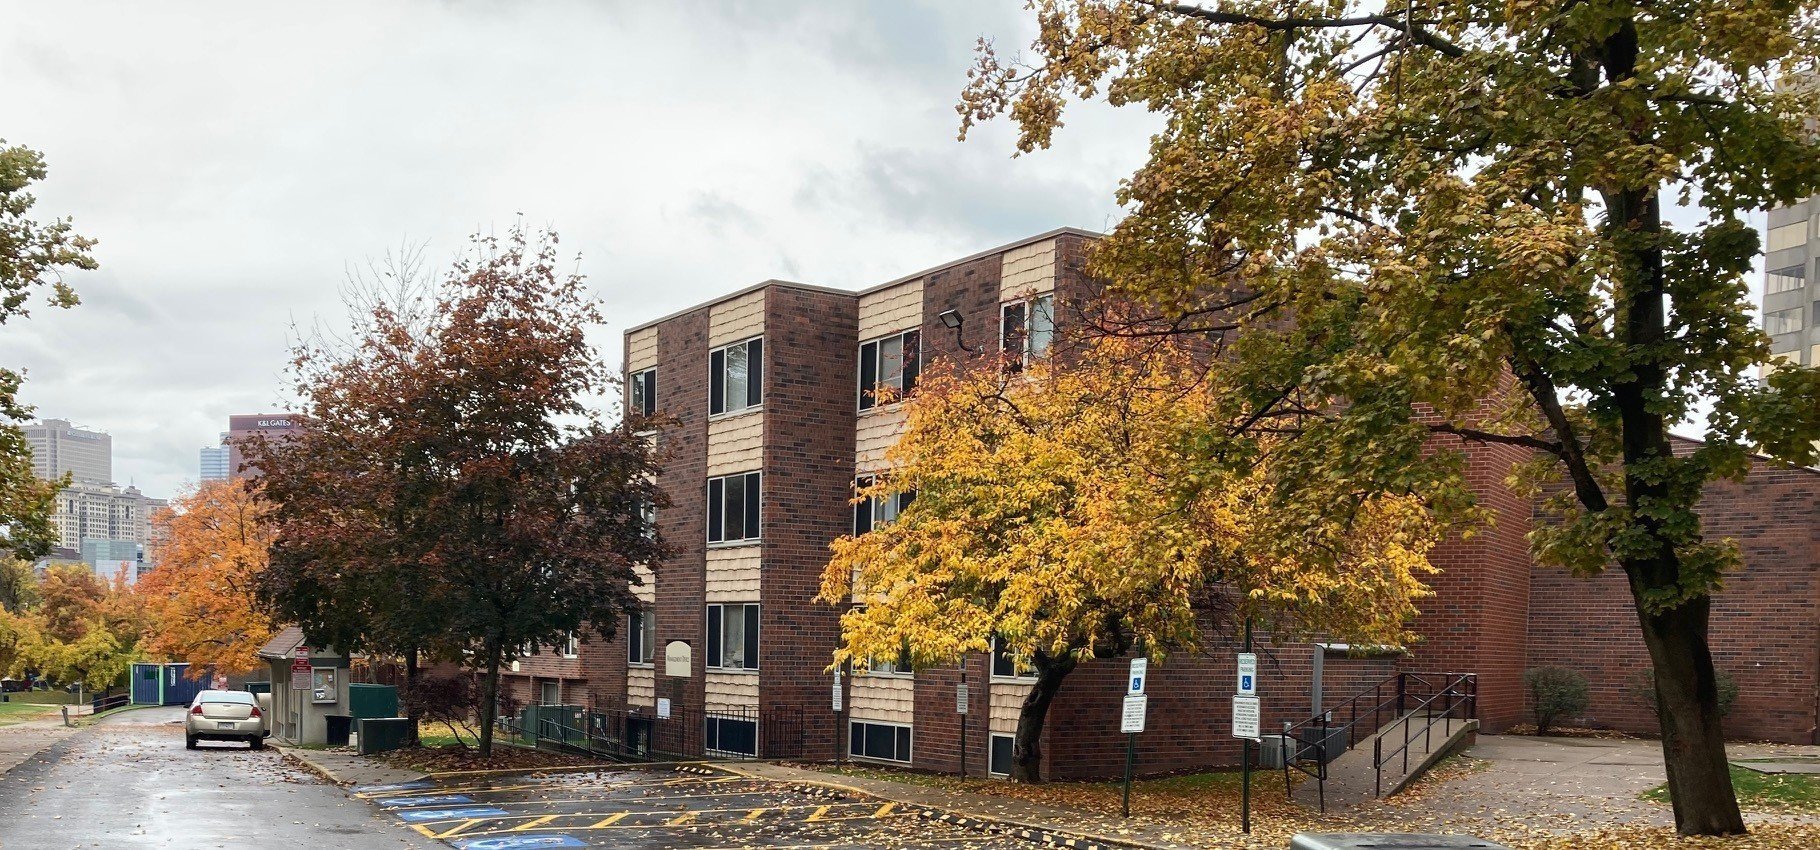 Allegheny Commons Apartments